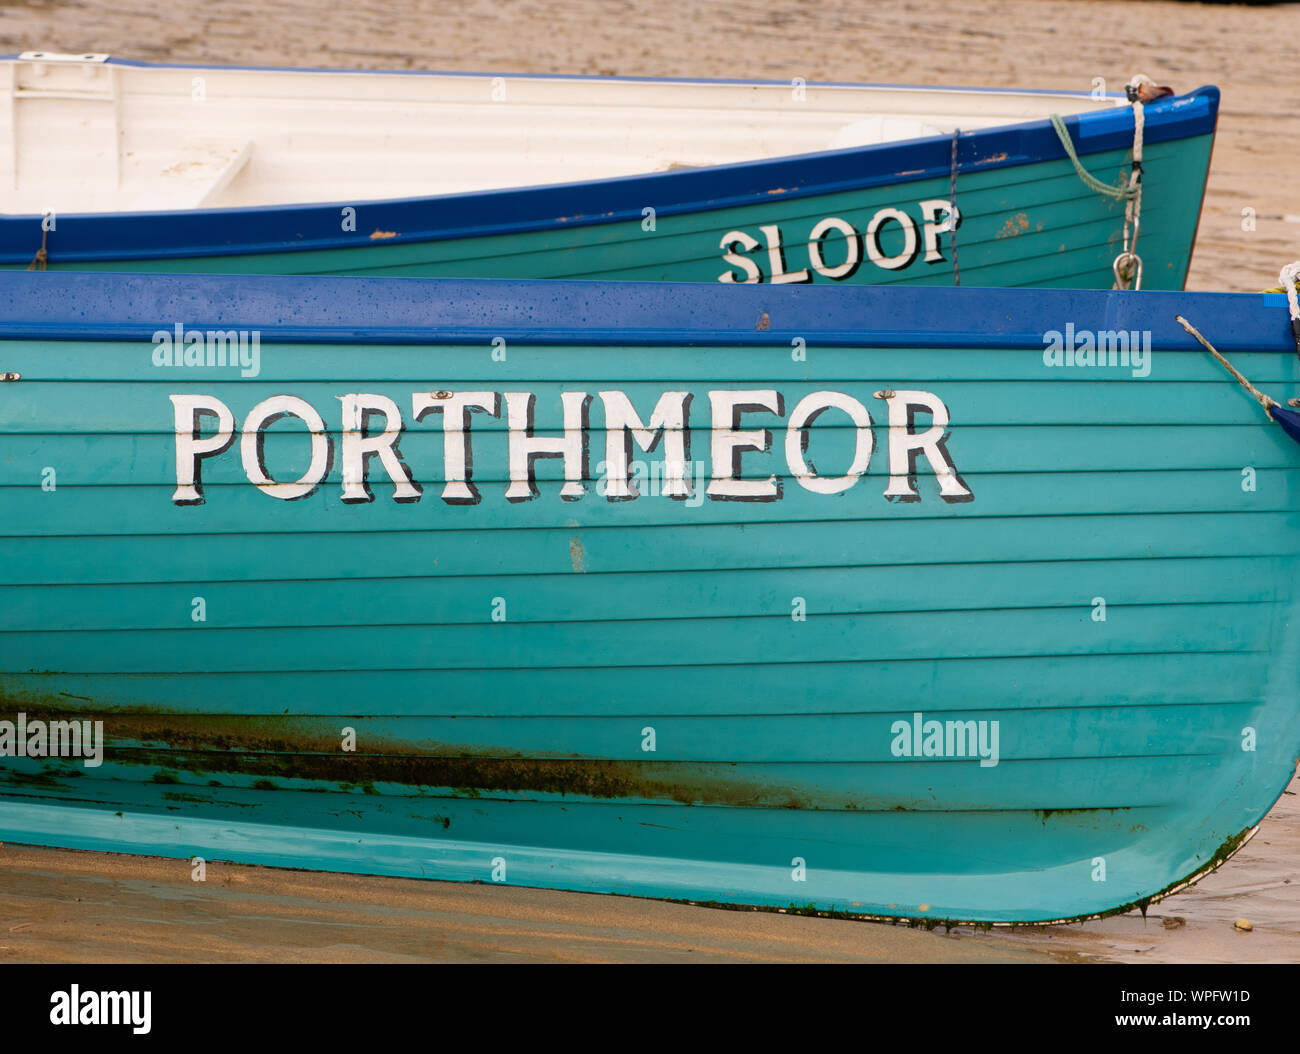 Porthmeor and Sloop boats number 3879 Stock Photo